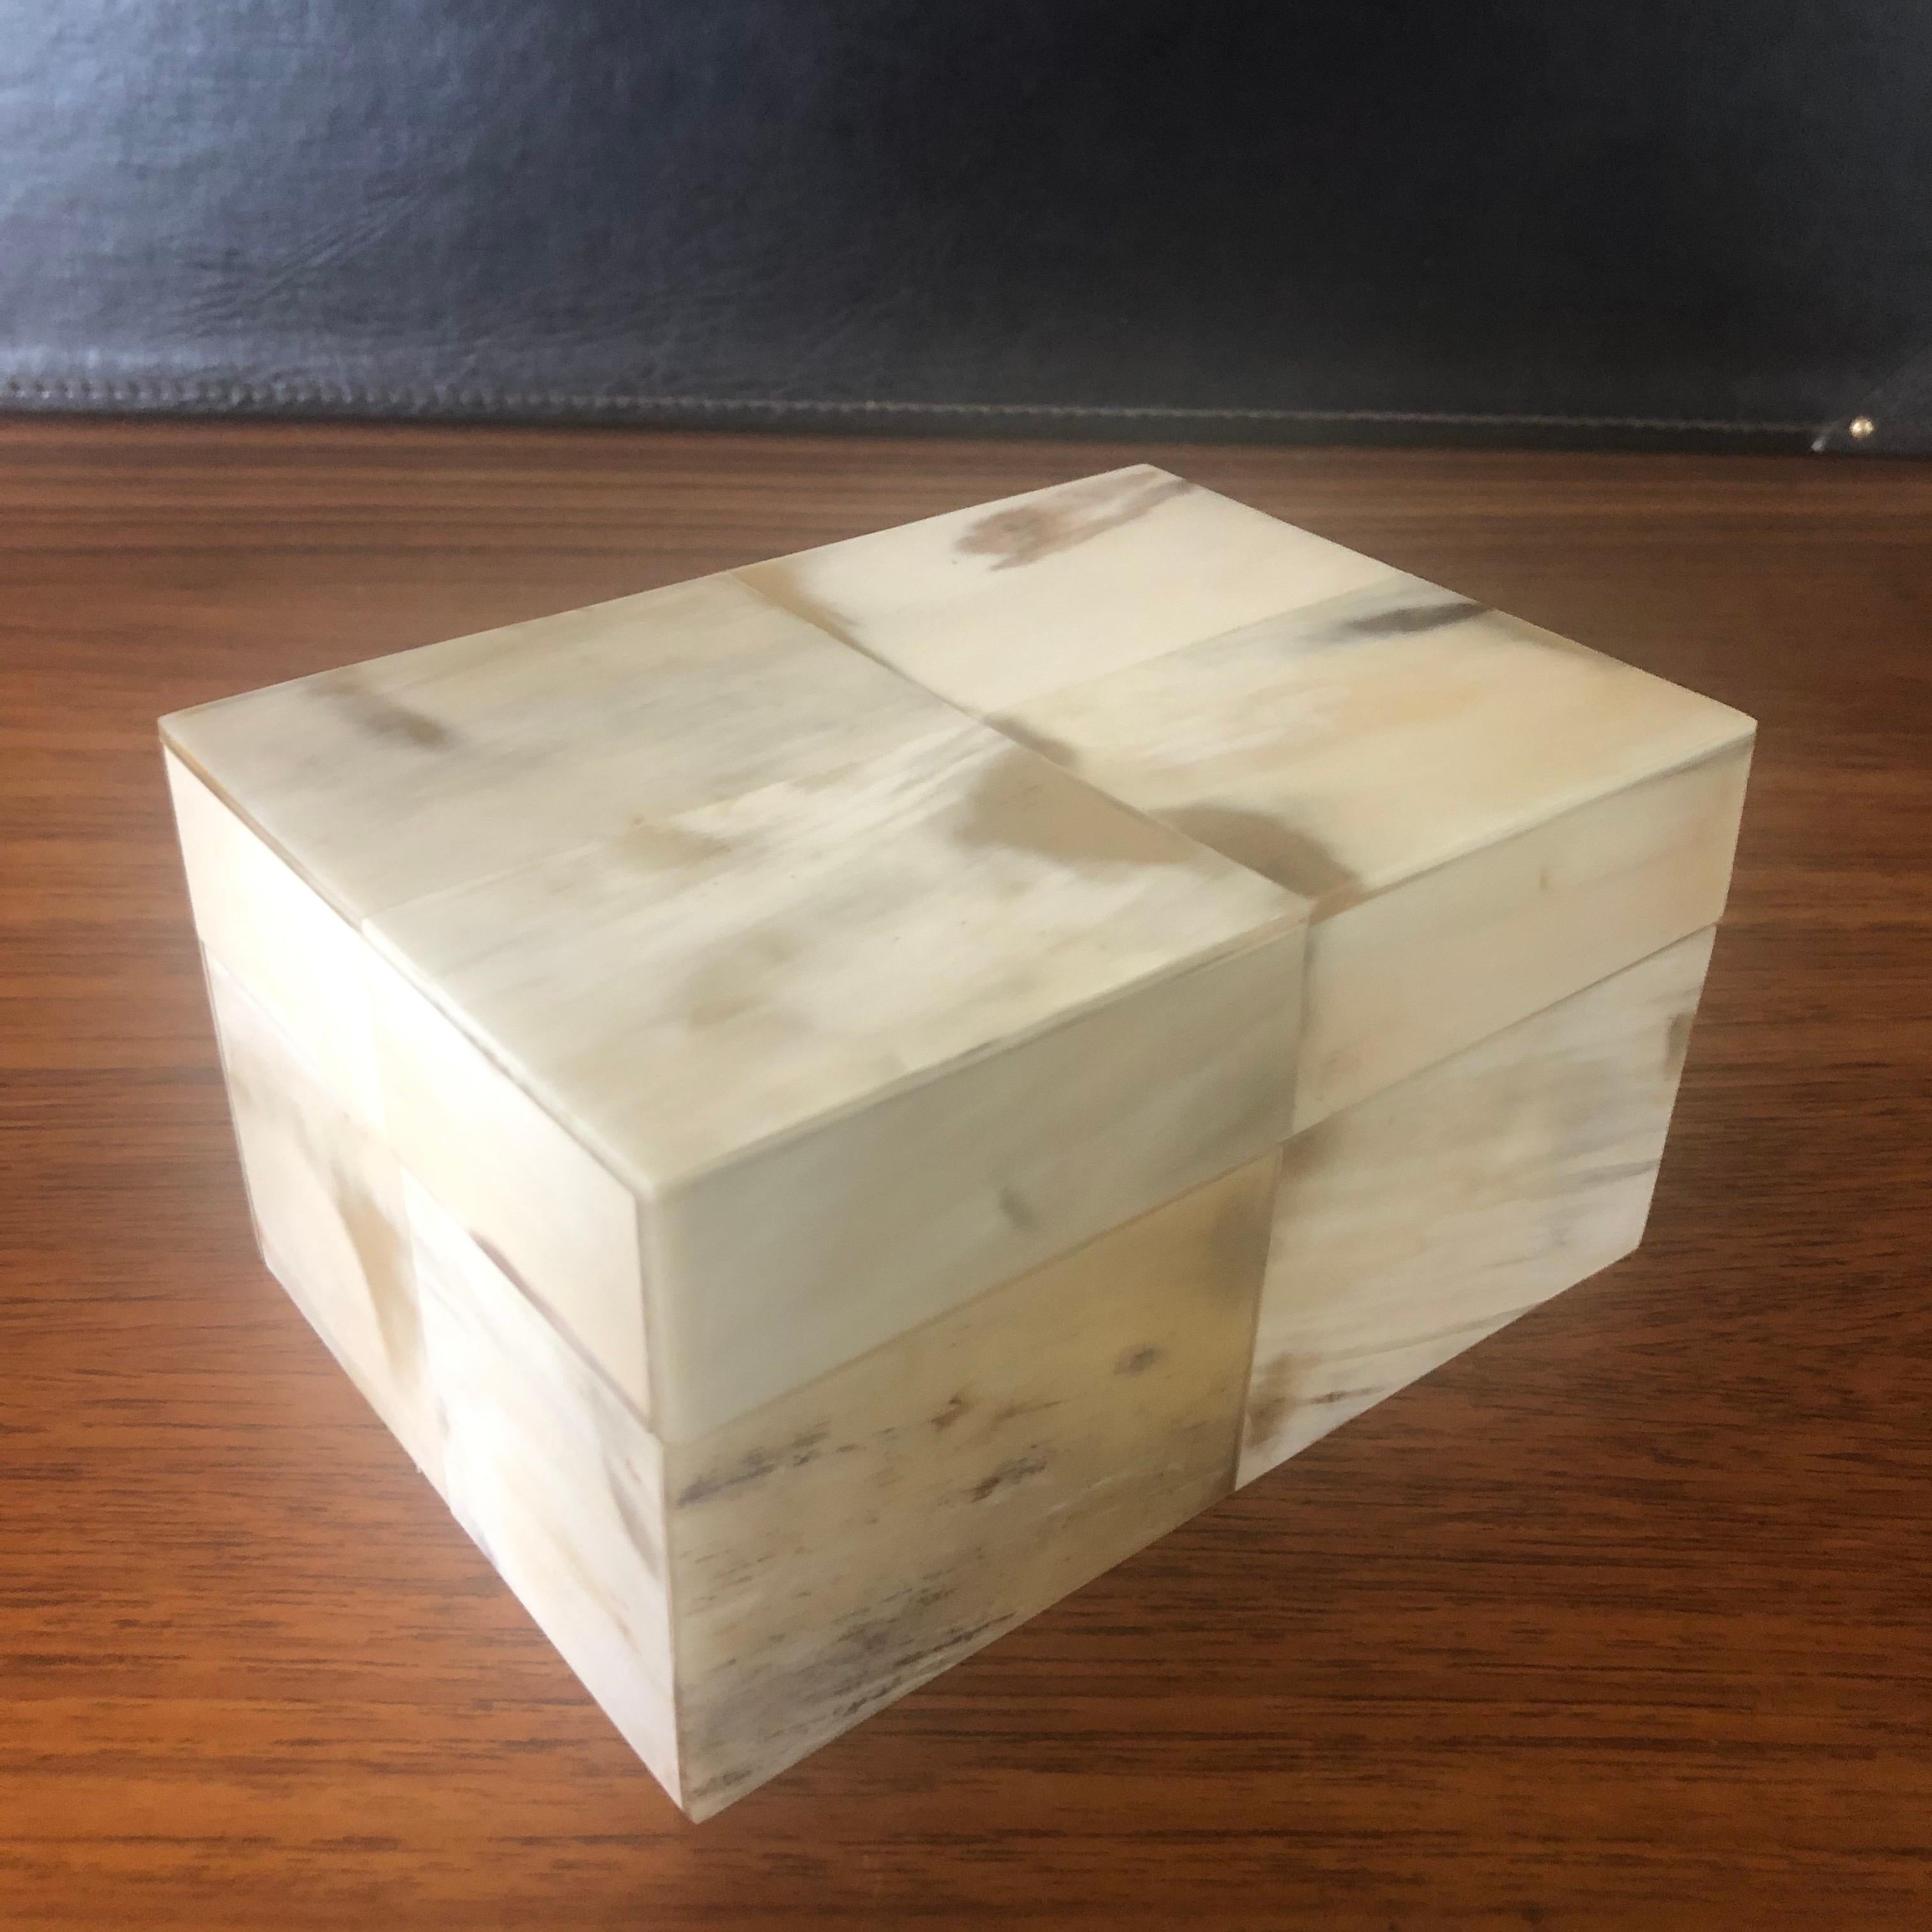 A very well crafted tessellated Horn cedar wood box, circa 1980s. The piece is very heavy and solid and measures 6.375